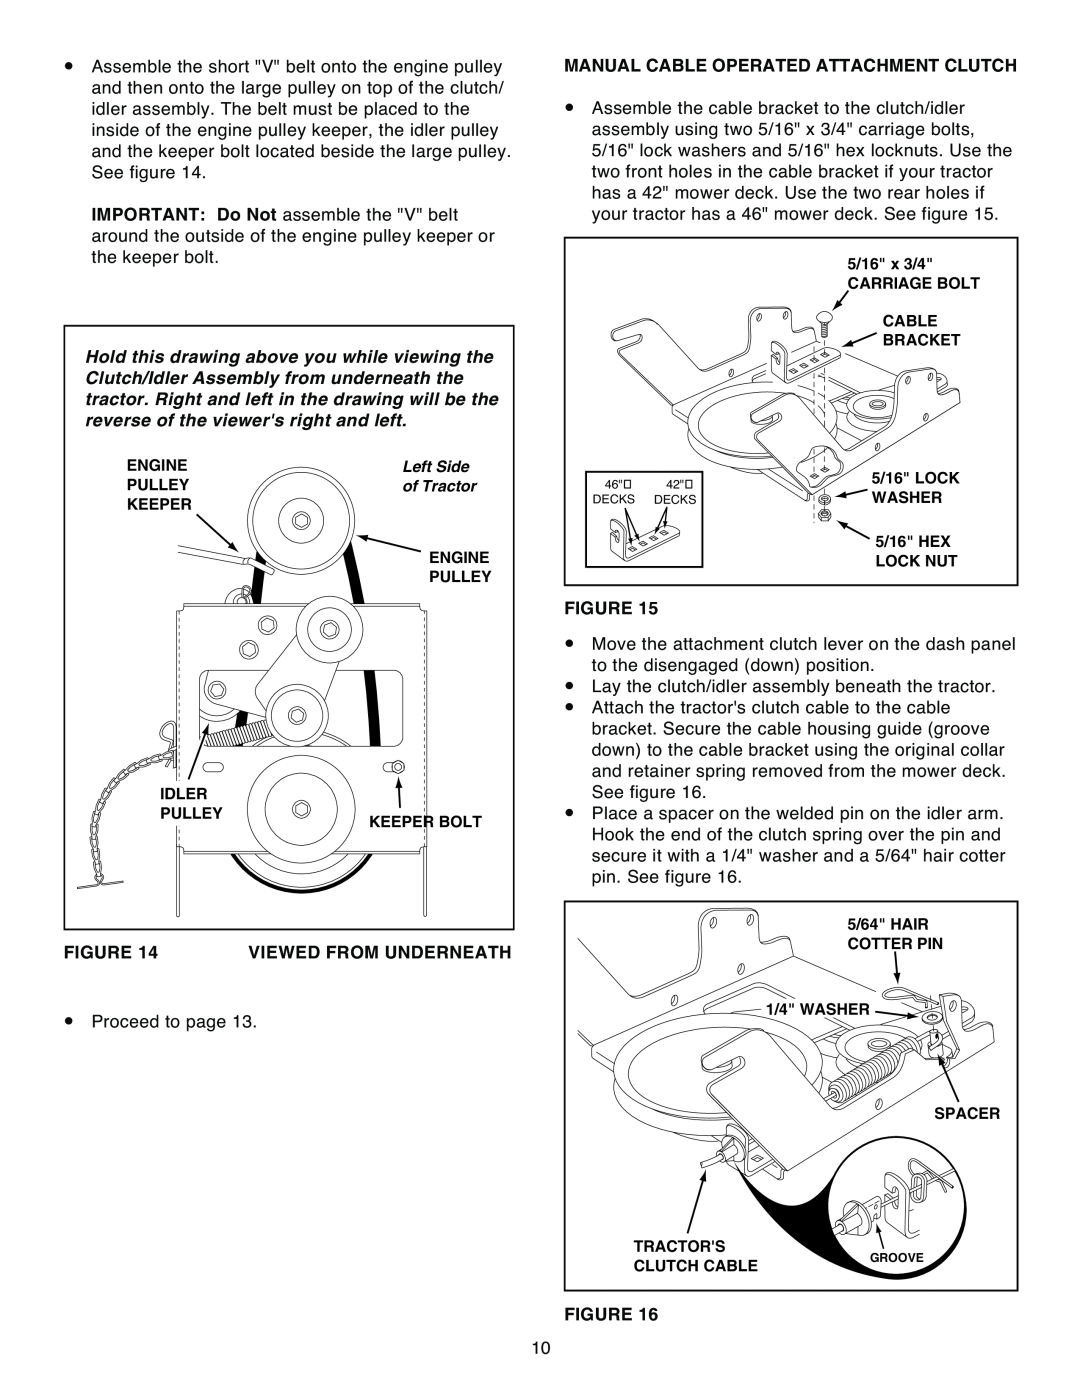 Sears 486.248392 owner manual Viewed From Underneath, Manual Cable Operated Attachment Clutch 